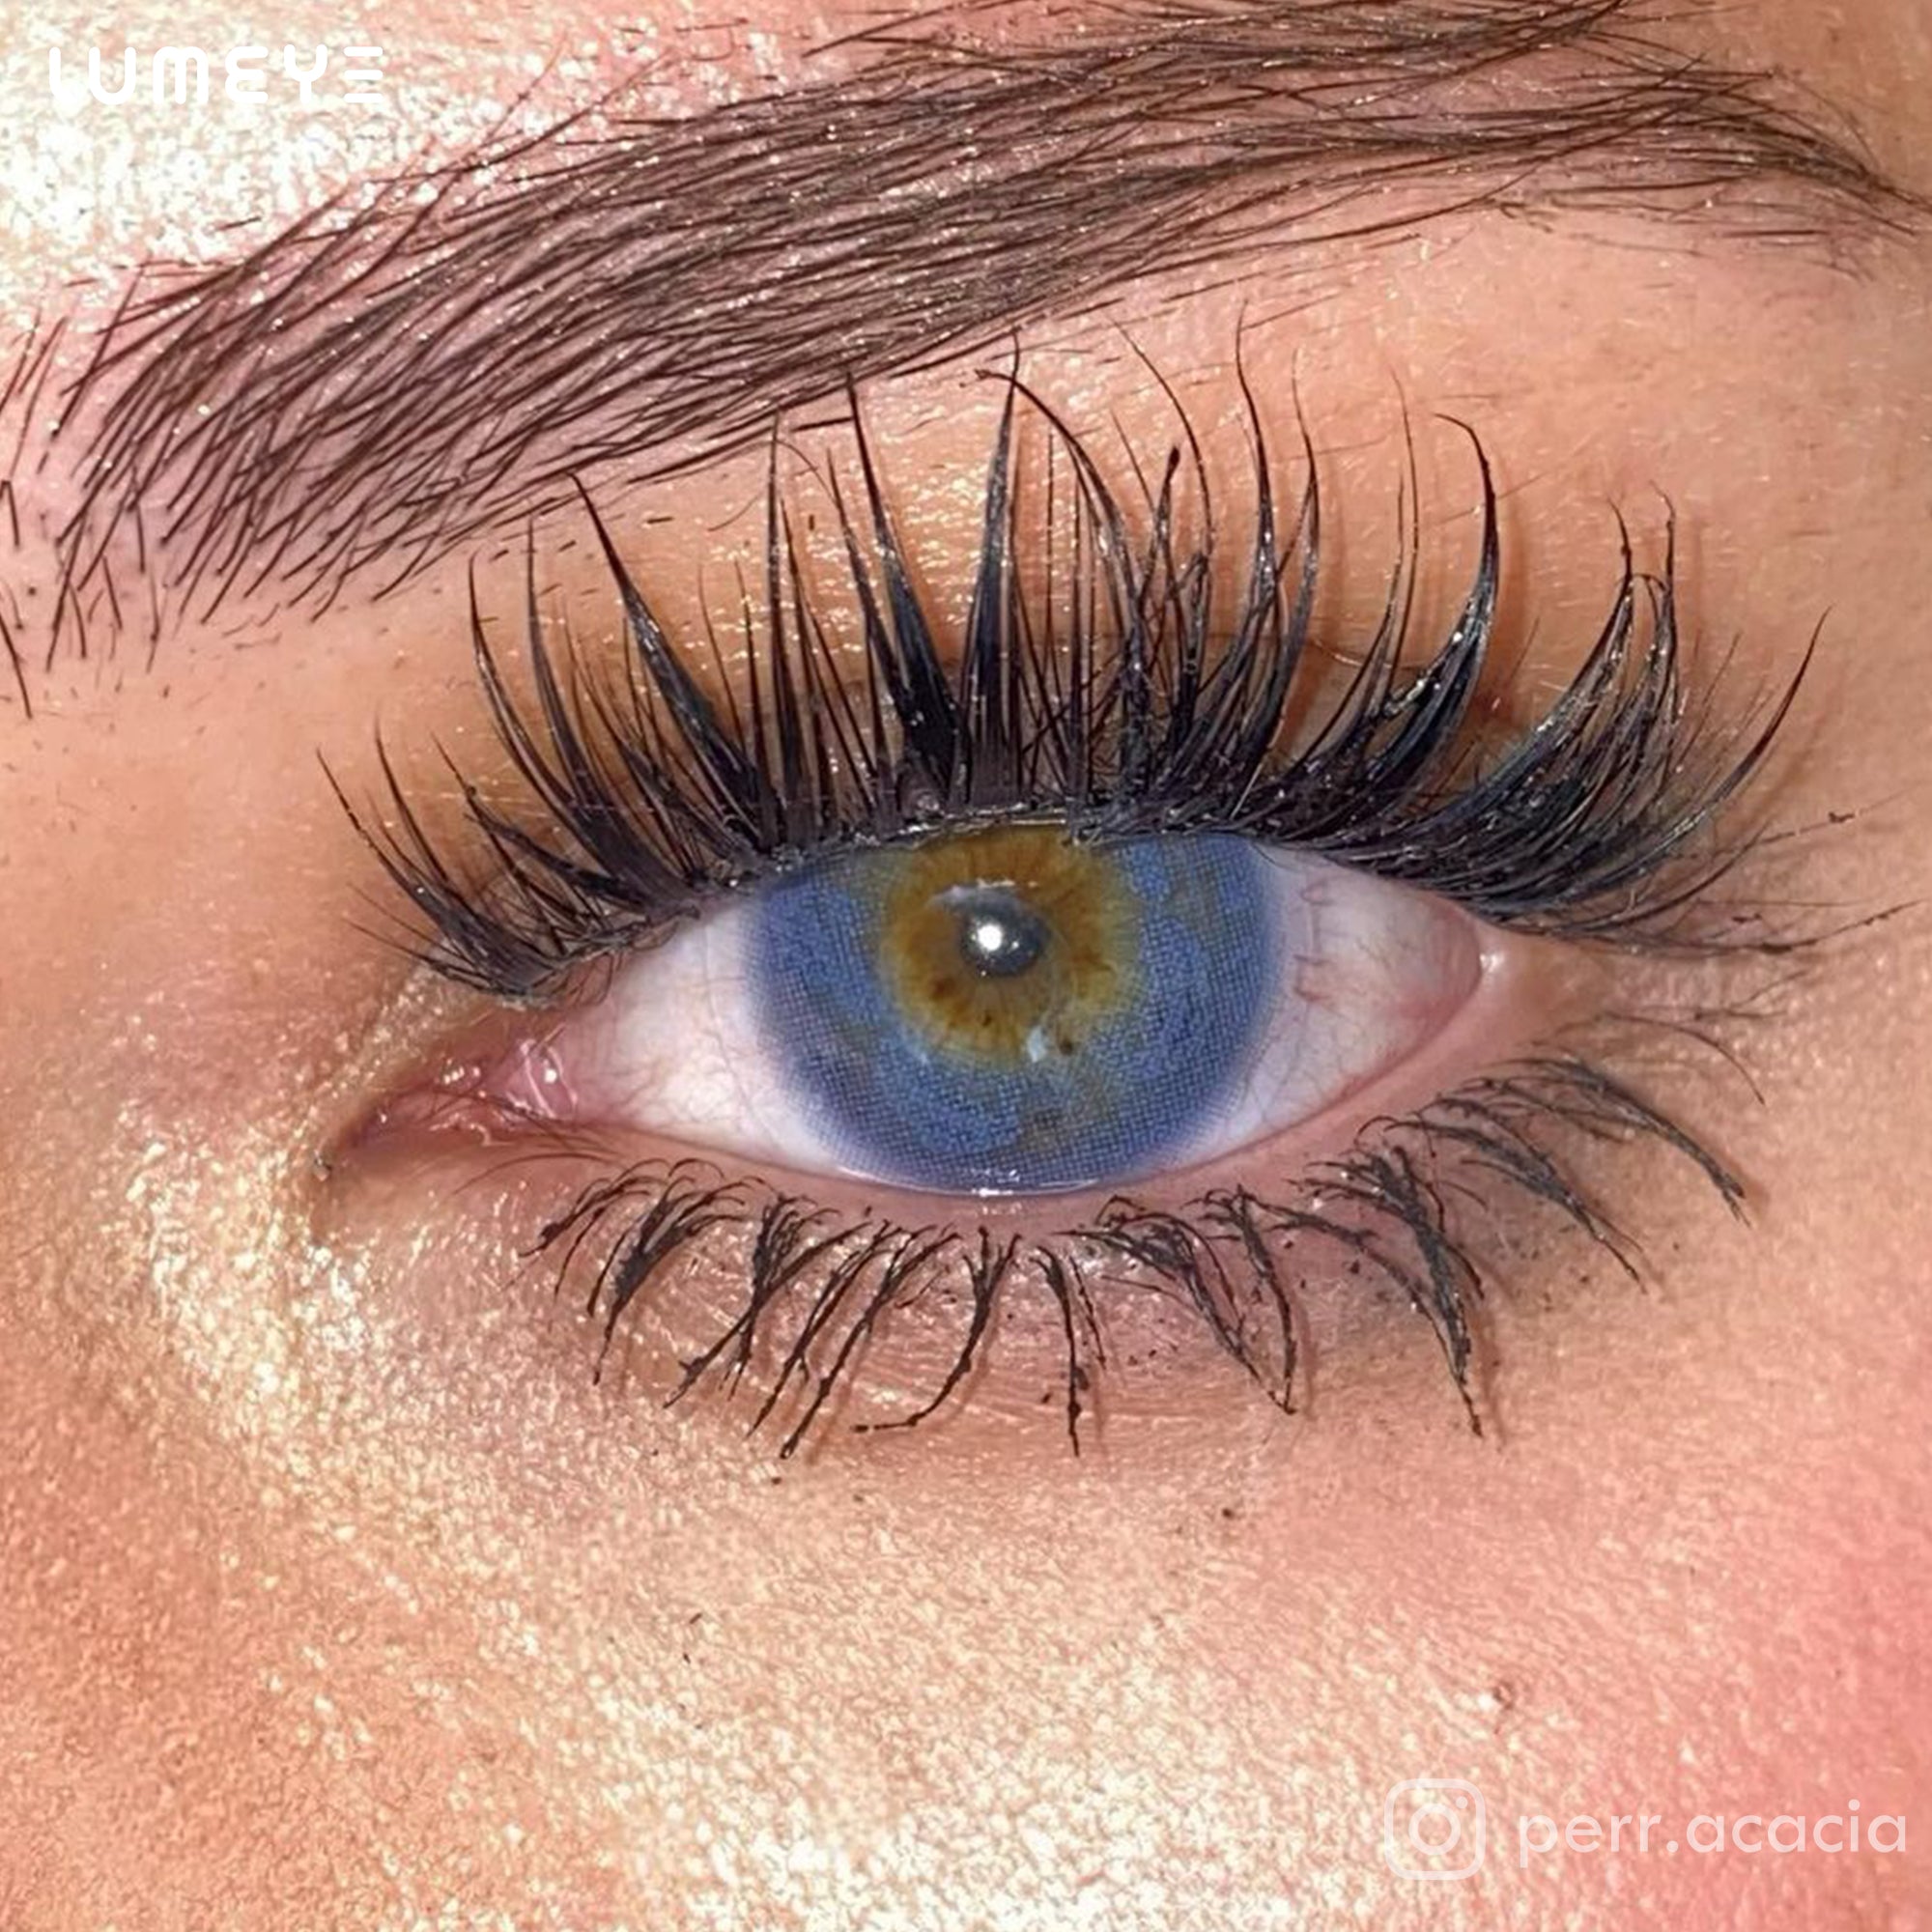 Best COLORED CONTACTS - LUMEYE Morpho Butterfly Blue Colored Contact Lenses - LUMEYE